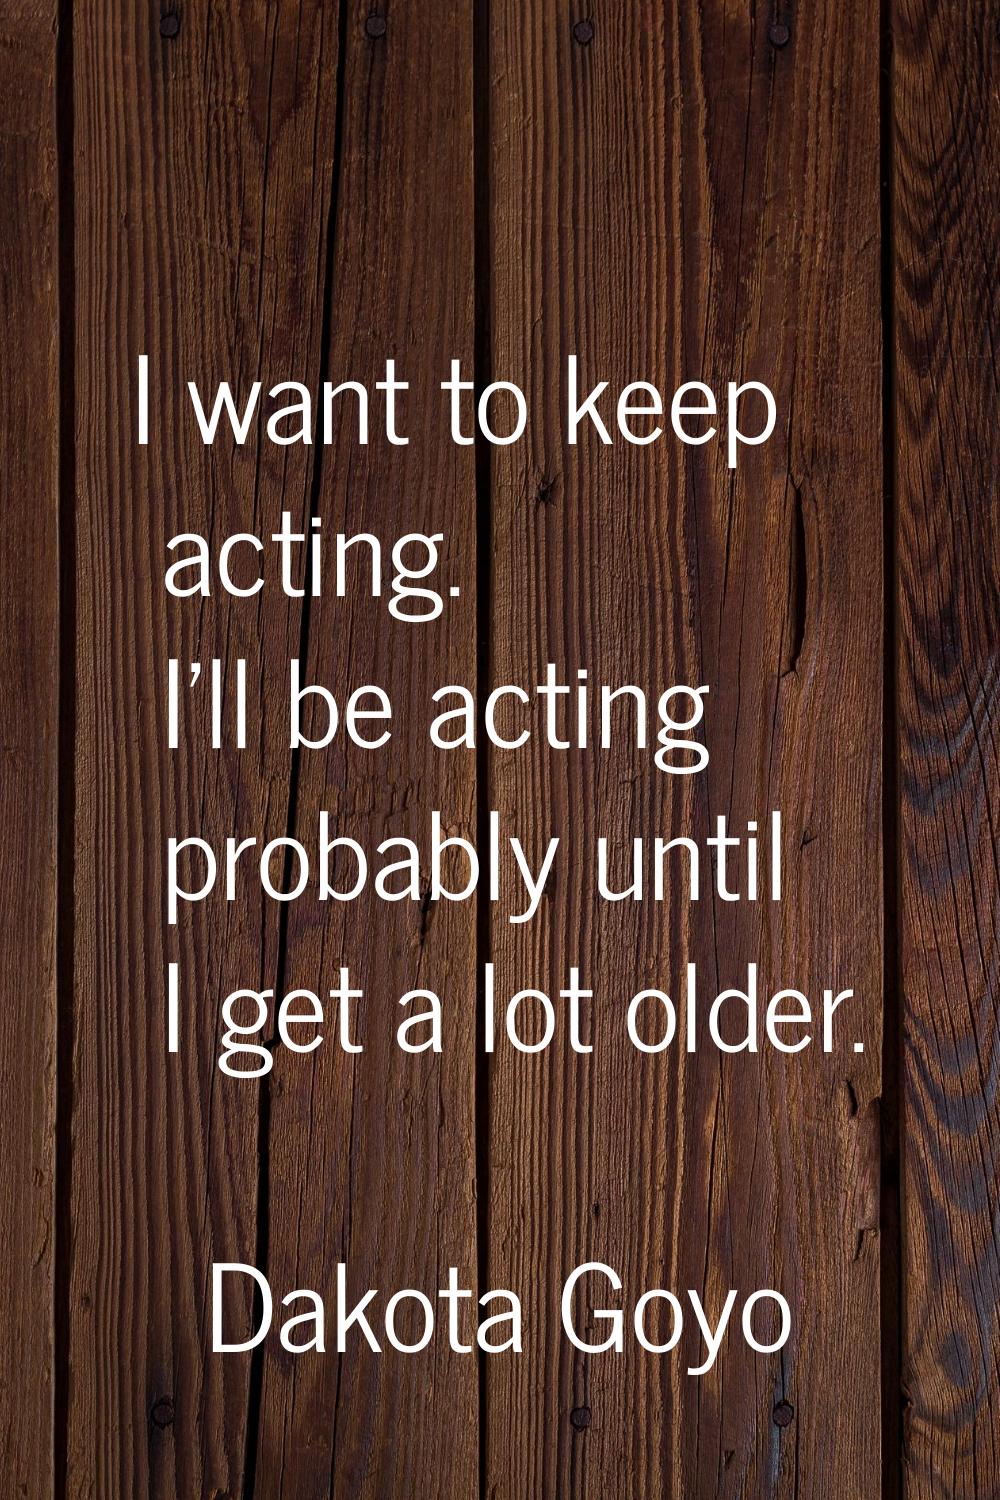 I want to keep acting. I'll be acting probably until I get a lot older.